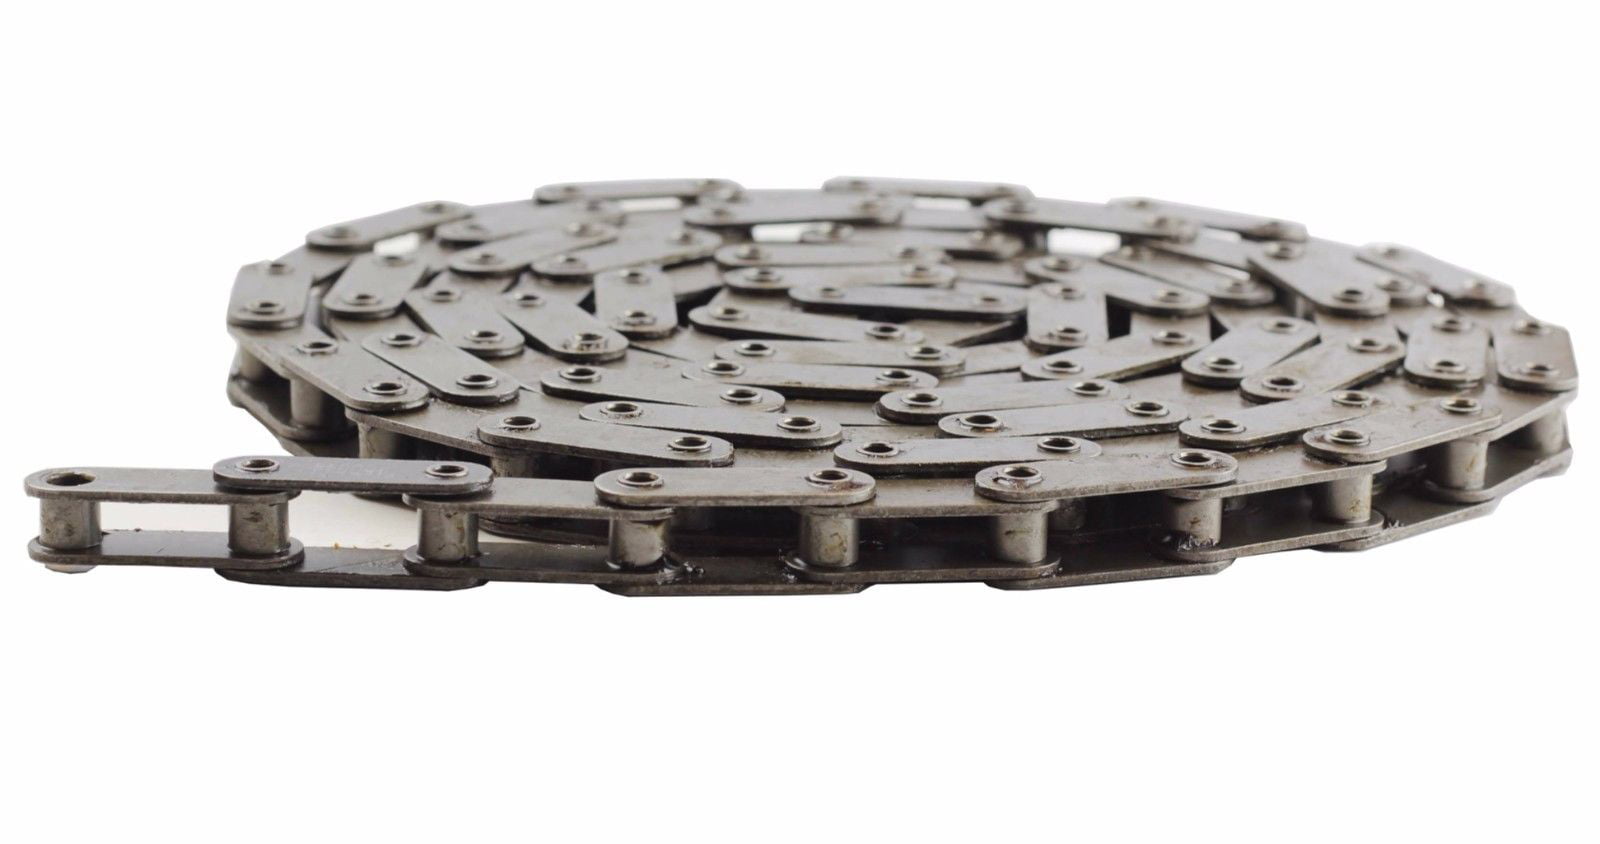 C2050H-HPSS Heavy Duty Hollow Pin Stainless Steel Conveyor Roller Chain 10 Feet with 1 Connecting Link 